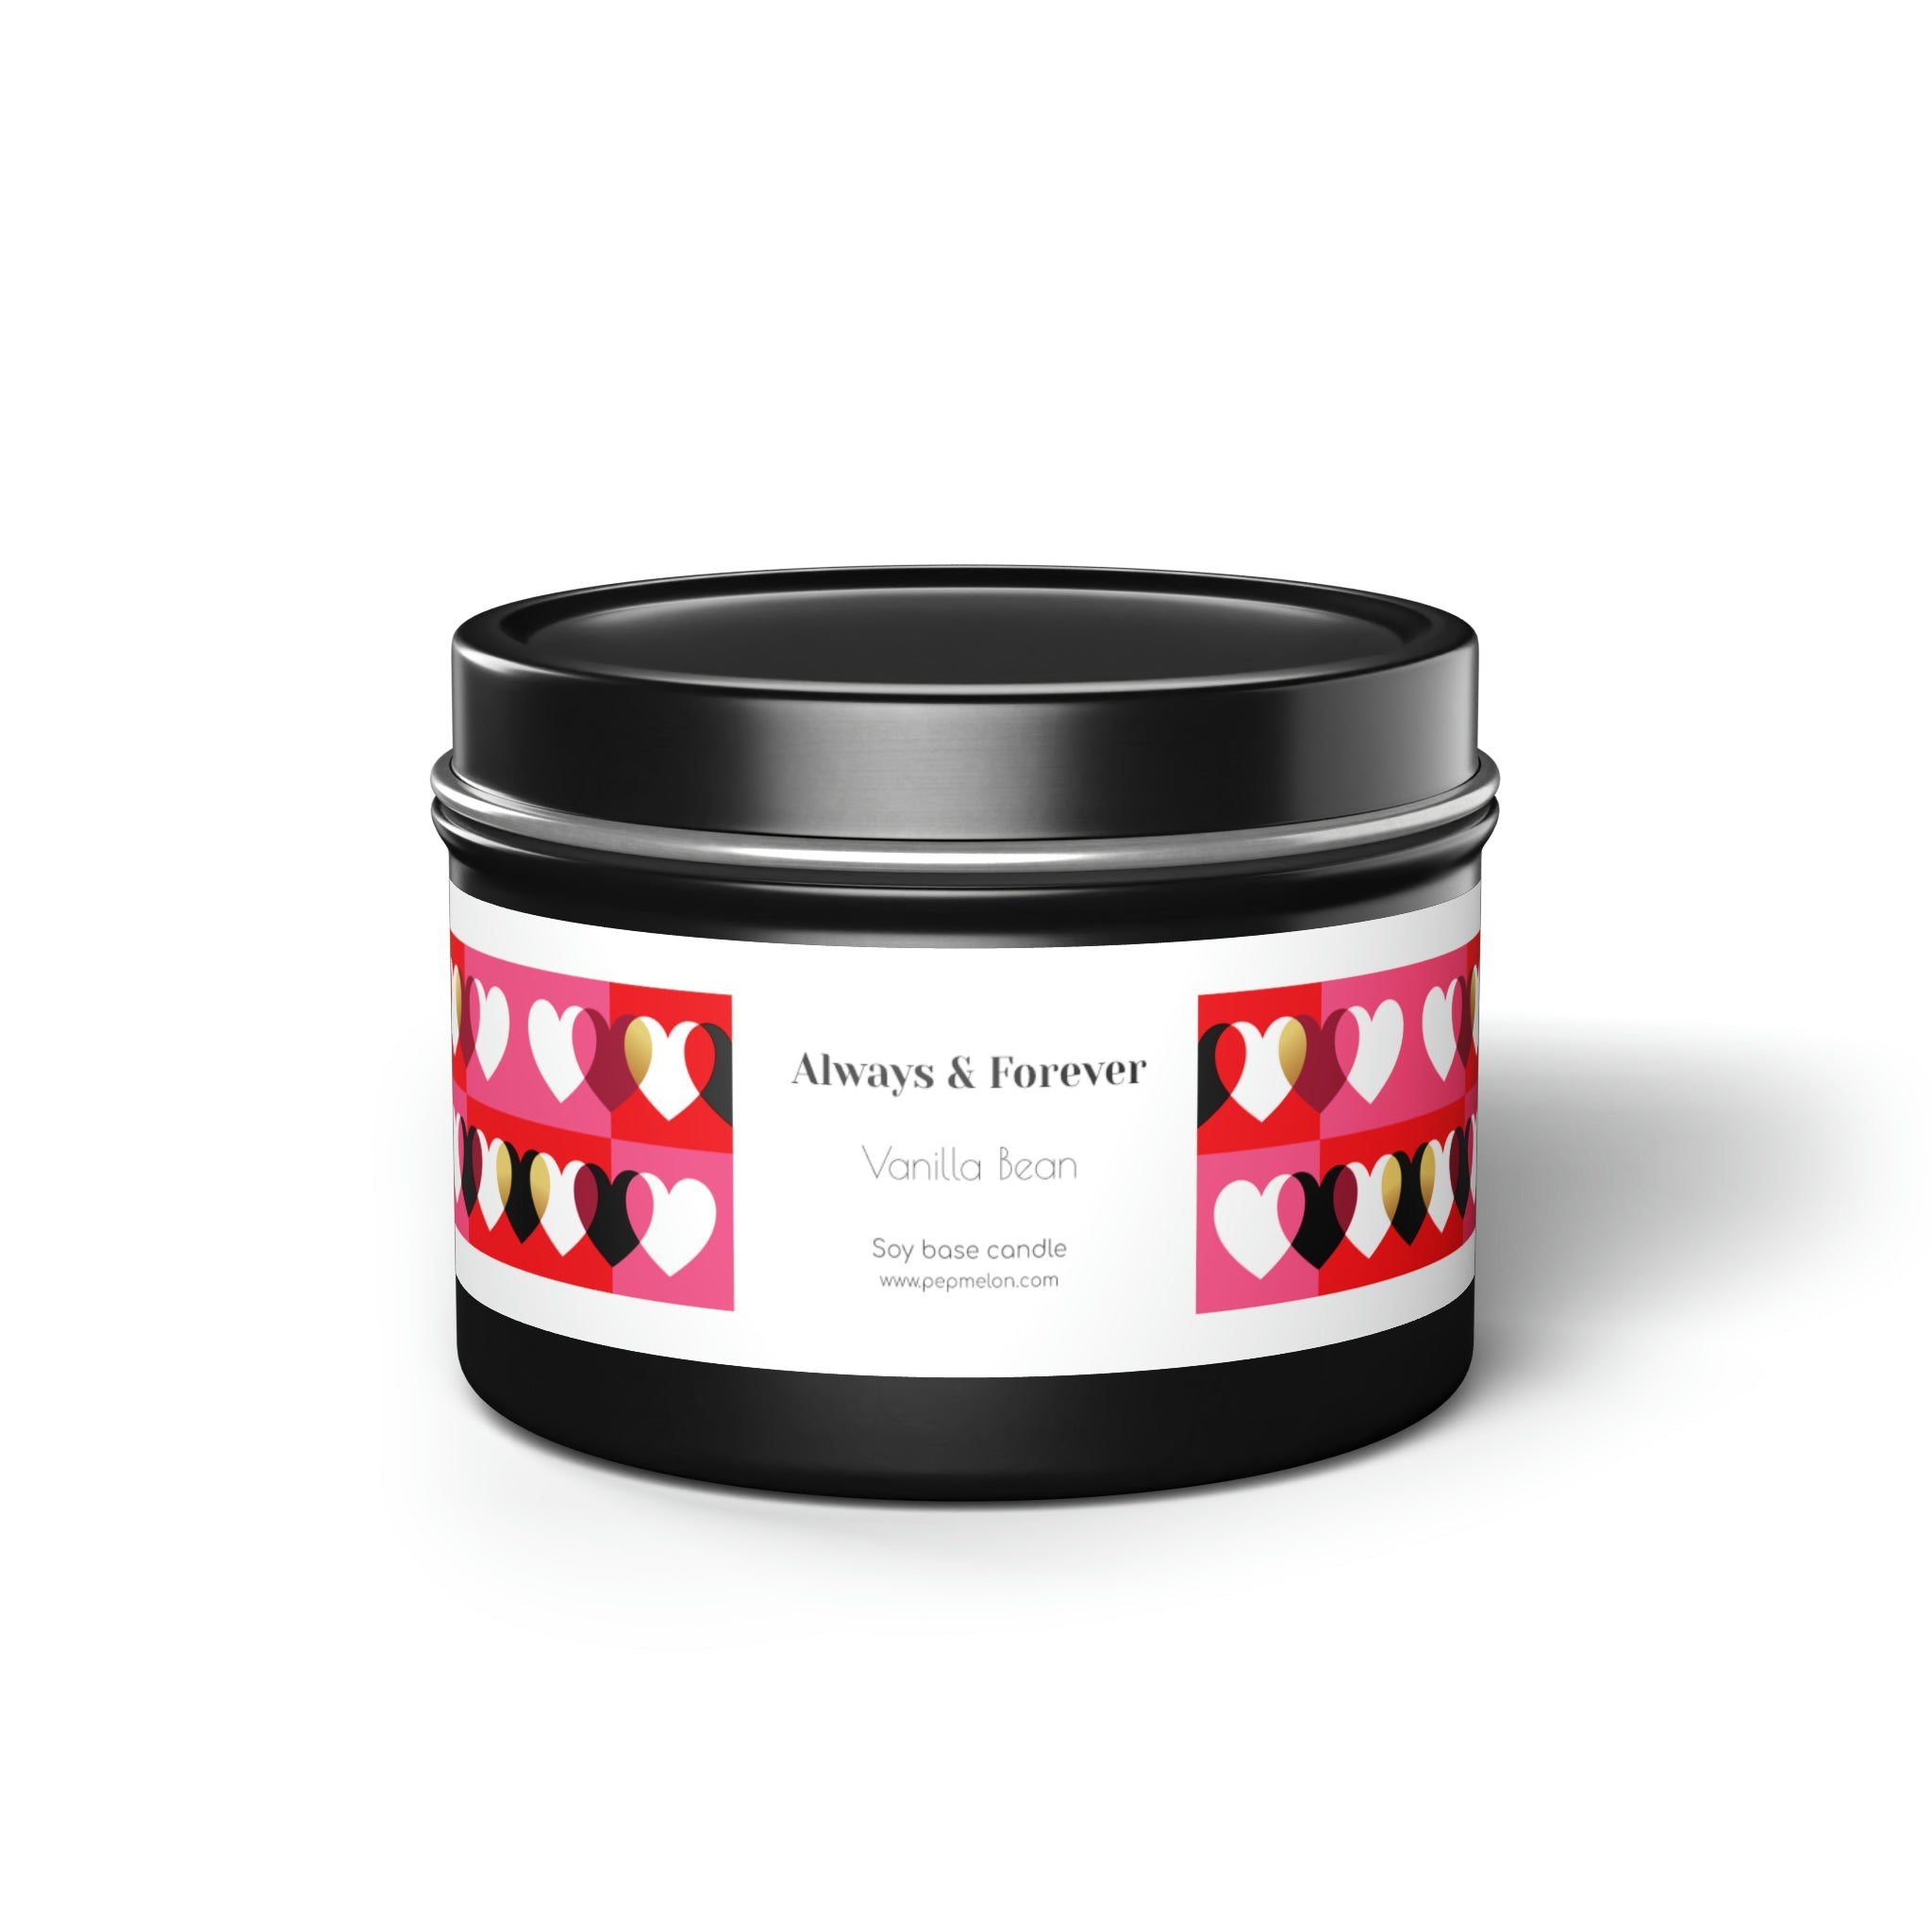 Vanilla Bean Always & Forever Soy base candle love, valentine's day gift Tin Candles-1